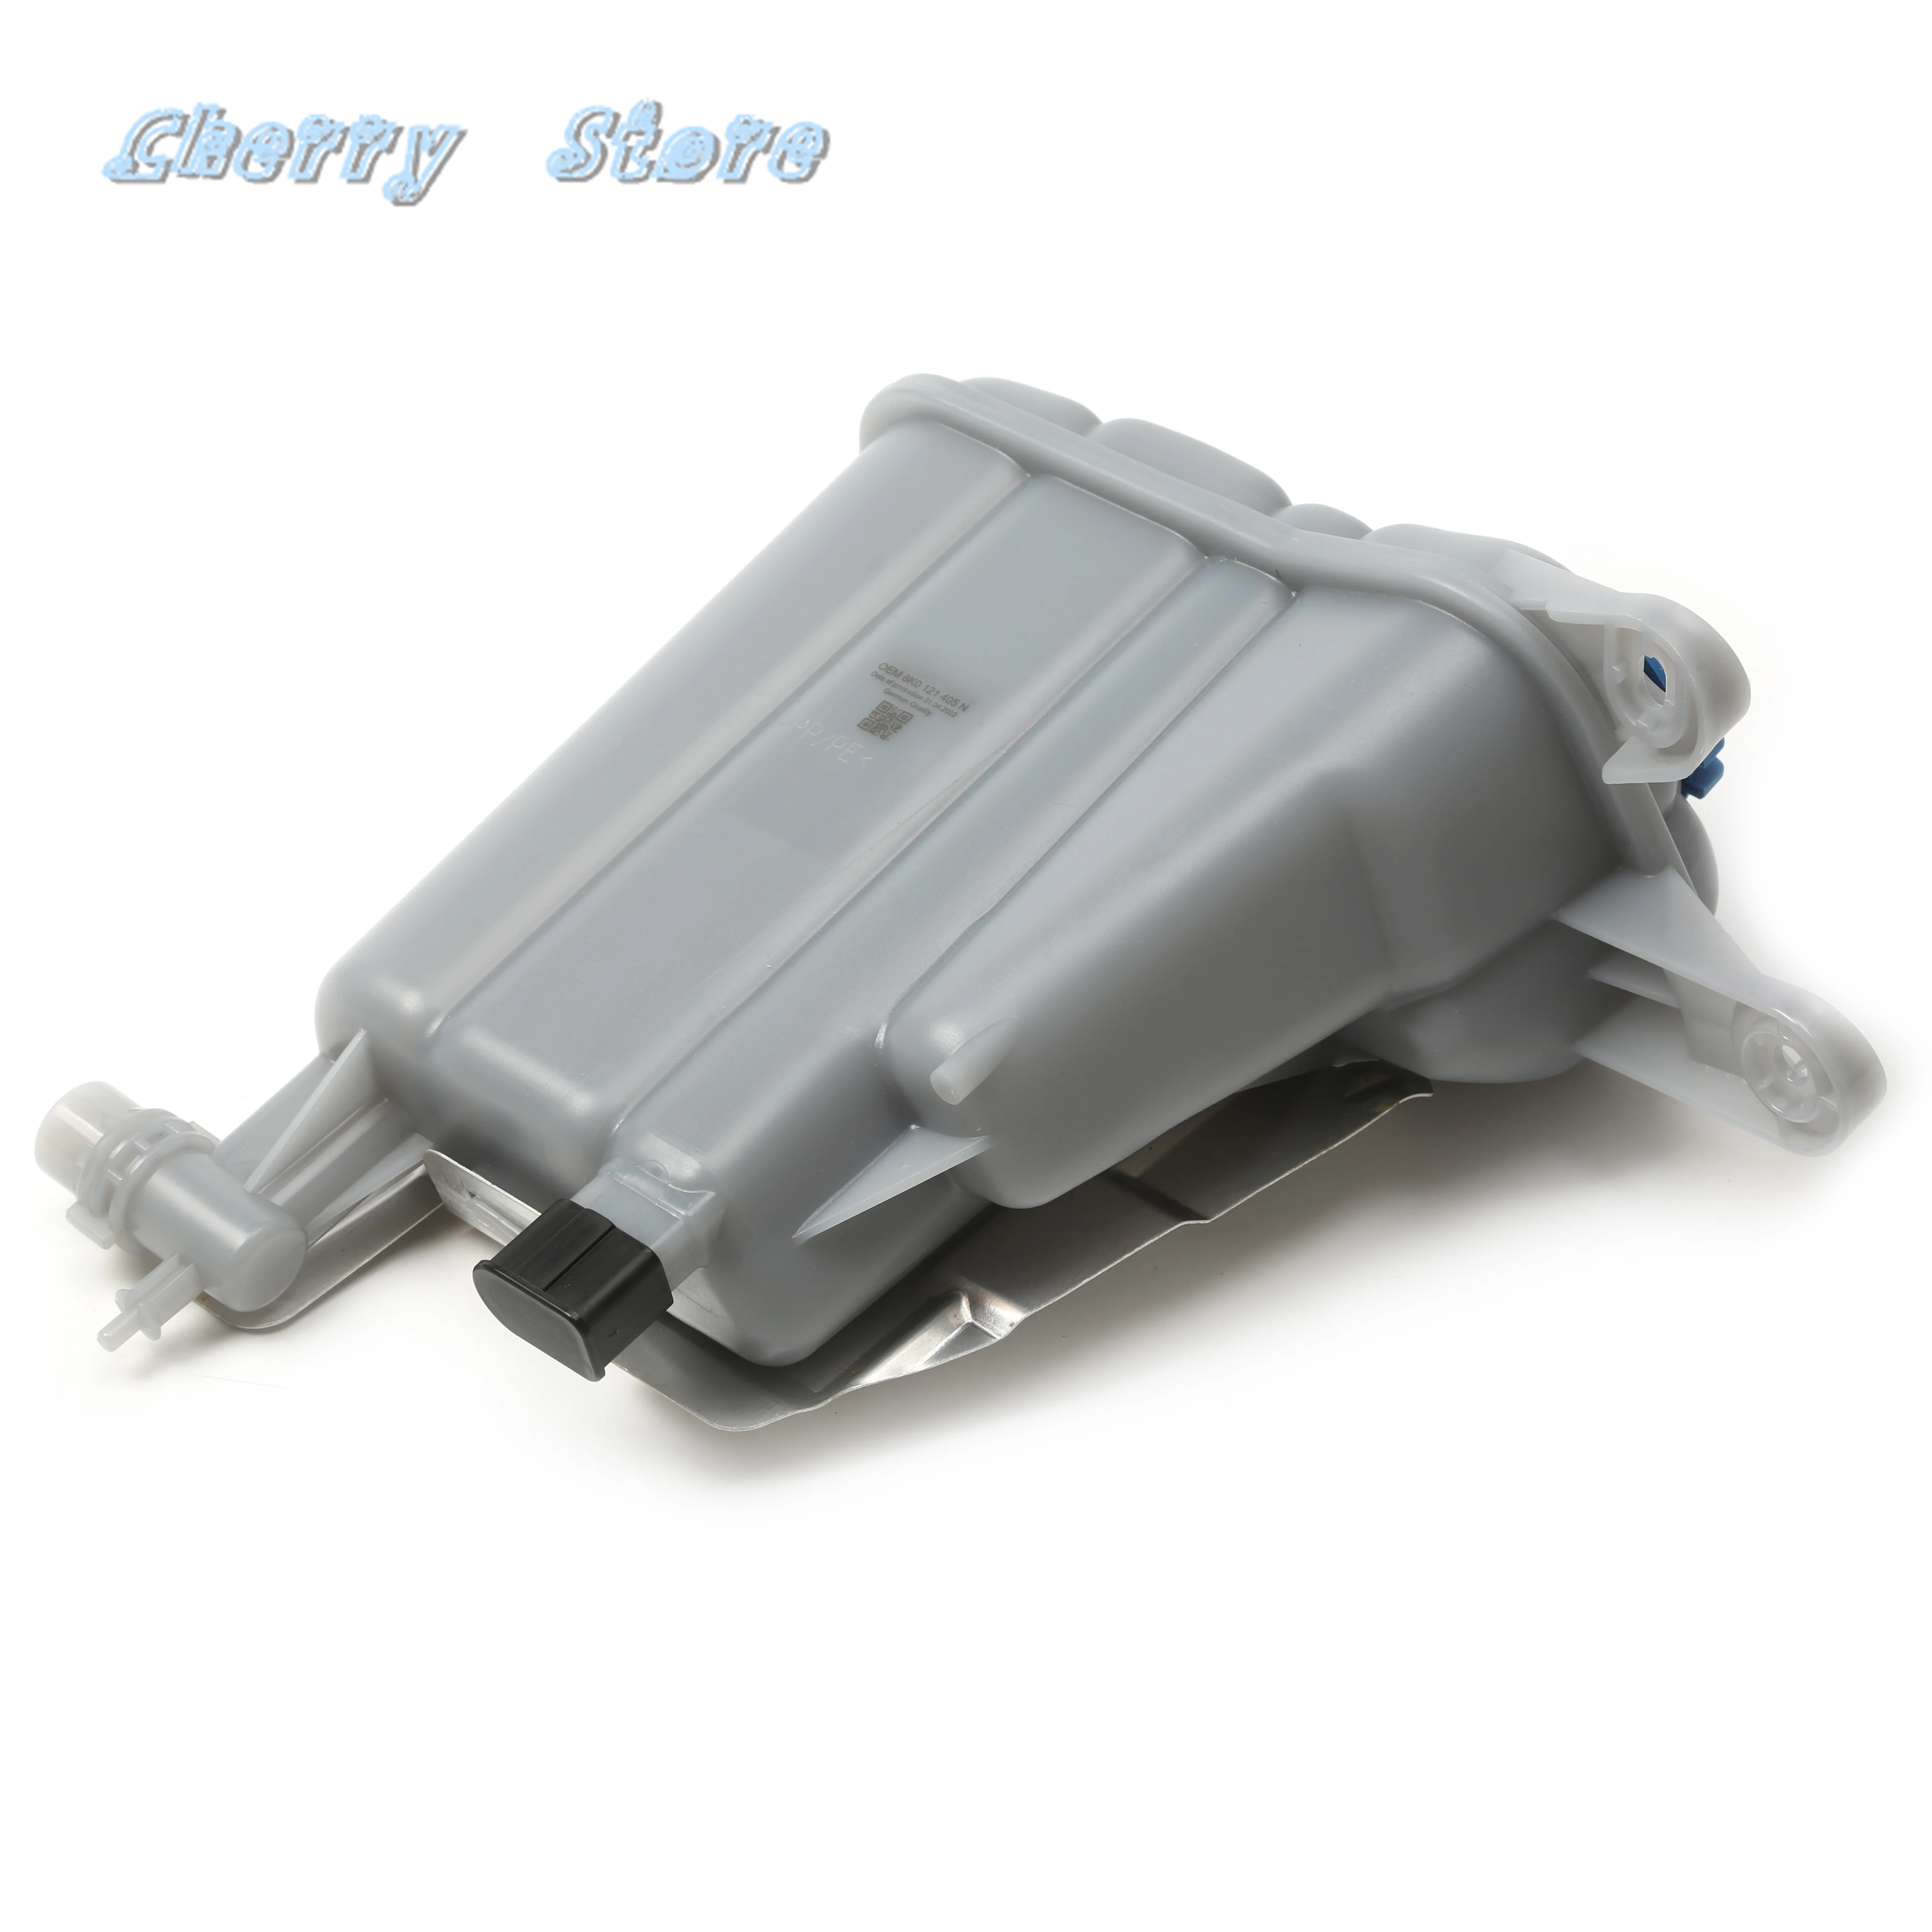 Radiator Expension Overflow Tank For AUDI A4 B8 A5 3.0 TFSI quattro CRED Q5 8K0121405N 8K0121405P